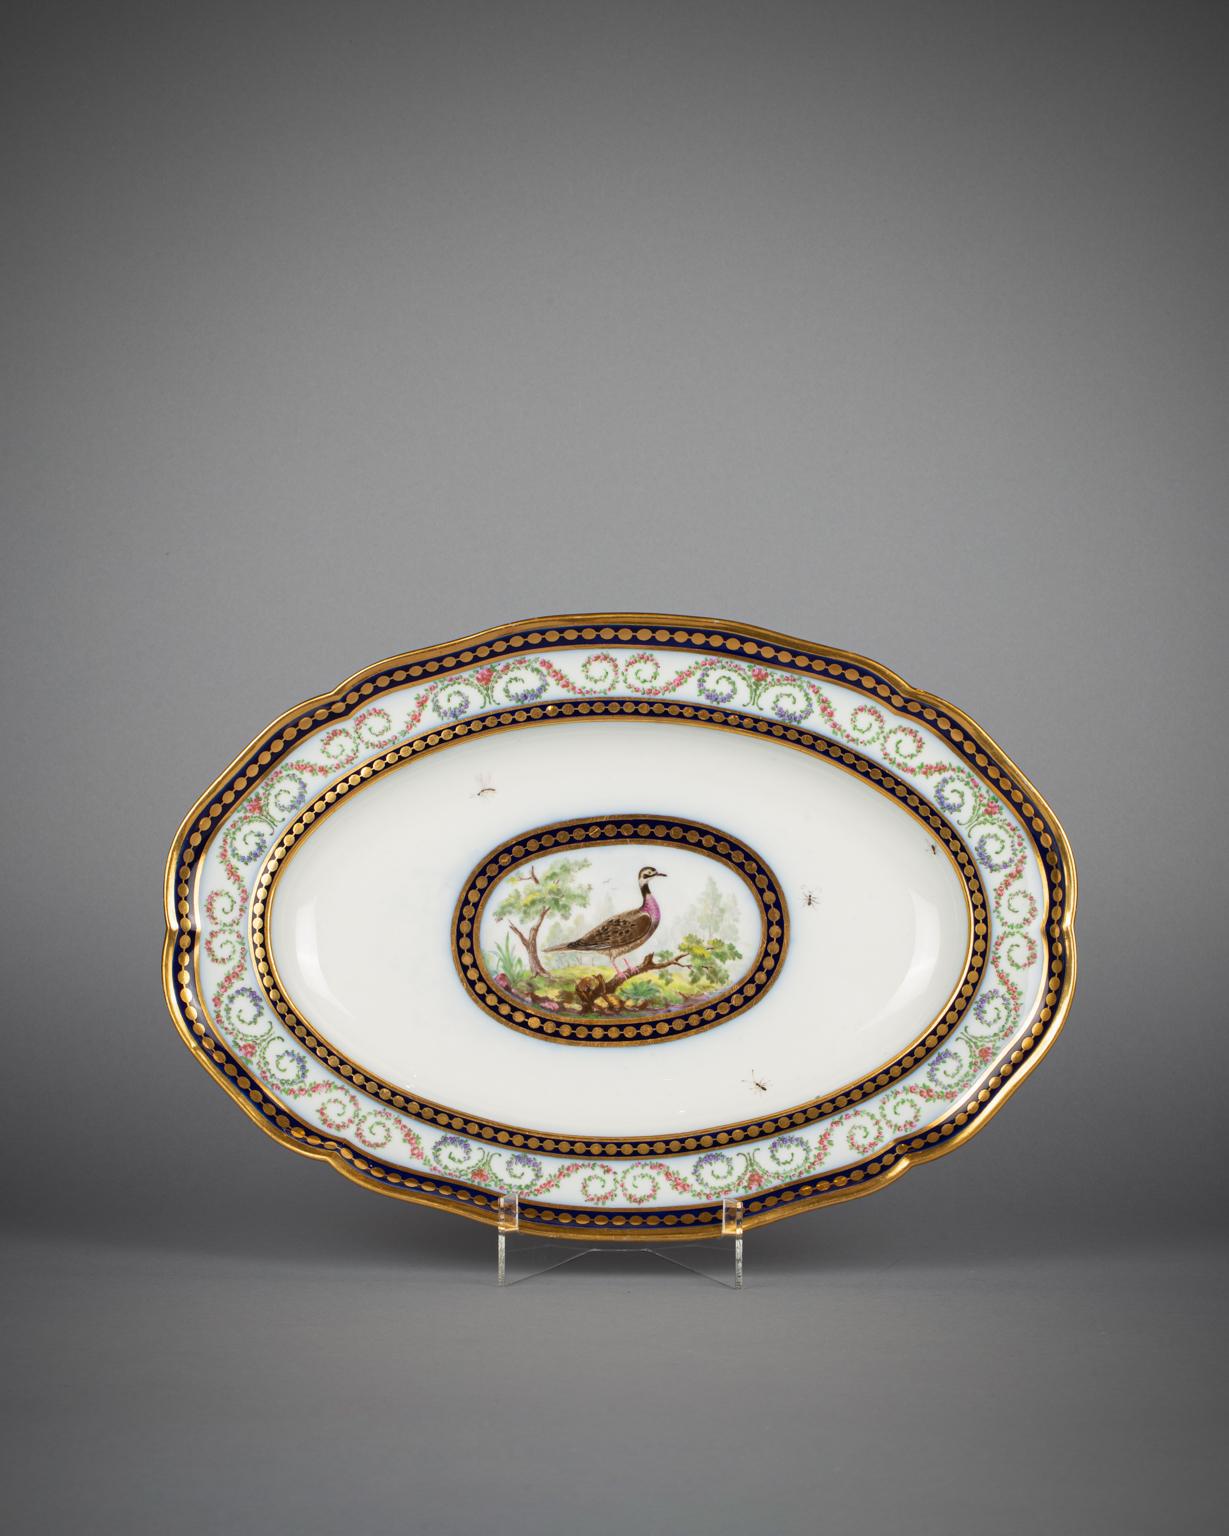 This platter comes from a Sèvres dinner service sold to the Dutch banker Jean-Baptiste Vandernyver on 29th November 1792. The platter is marked painted by Francois Baudoin Pere and gilded by Henri-Martin Prevost.